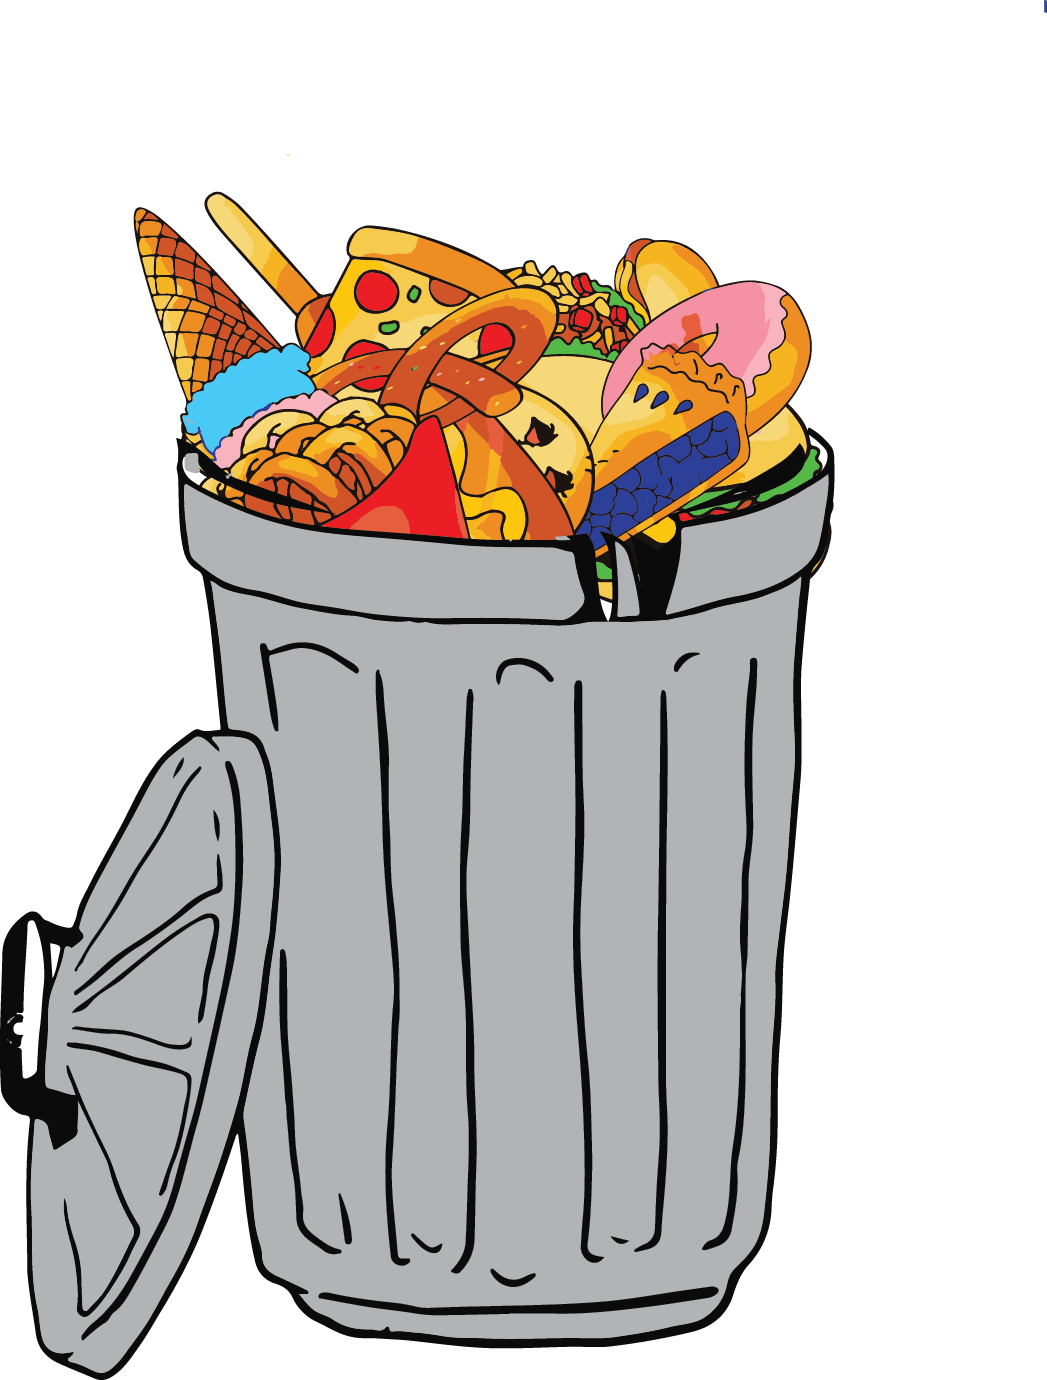 Colleges make effort to reduce food waste across campus - The DePaulia